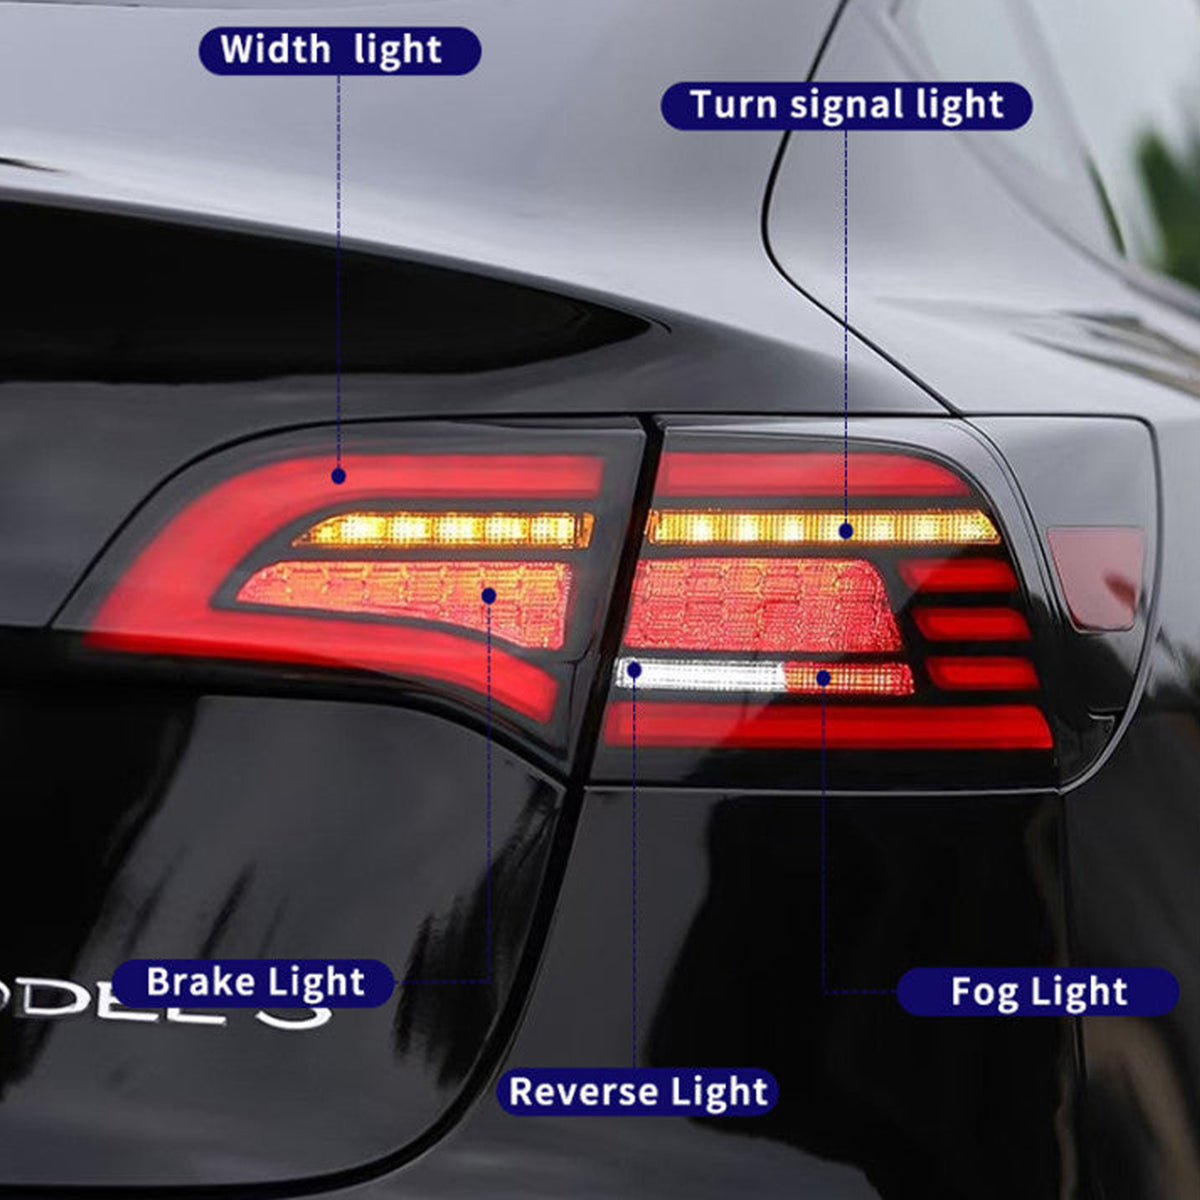 Turoaz LED Tail Light Assembly for Tesla Model 3 Y 2021+, Streamlined LED Sequential Turn Lights with Dynamic Startup Back Rear Lamps, Reverse Lights Accessories (Eagle Eye)